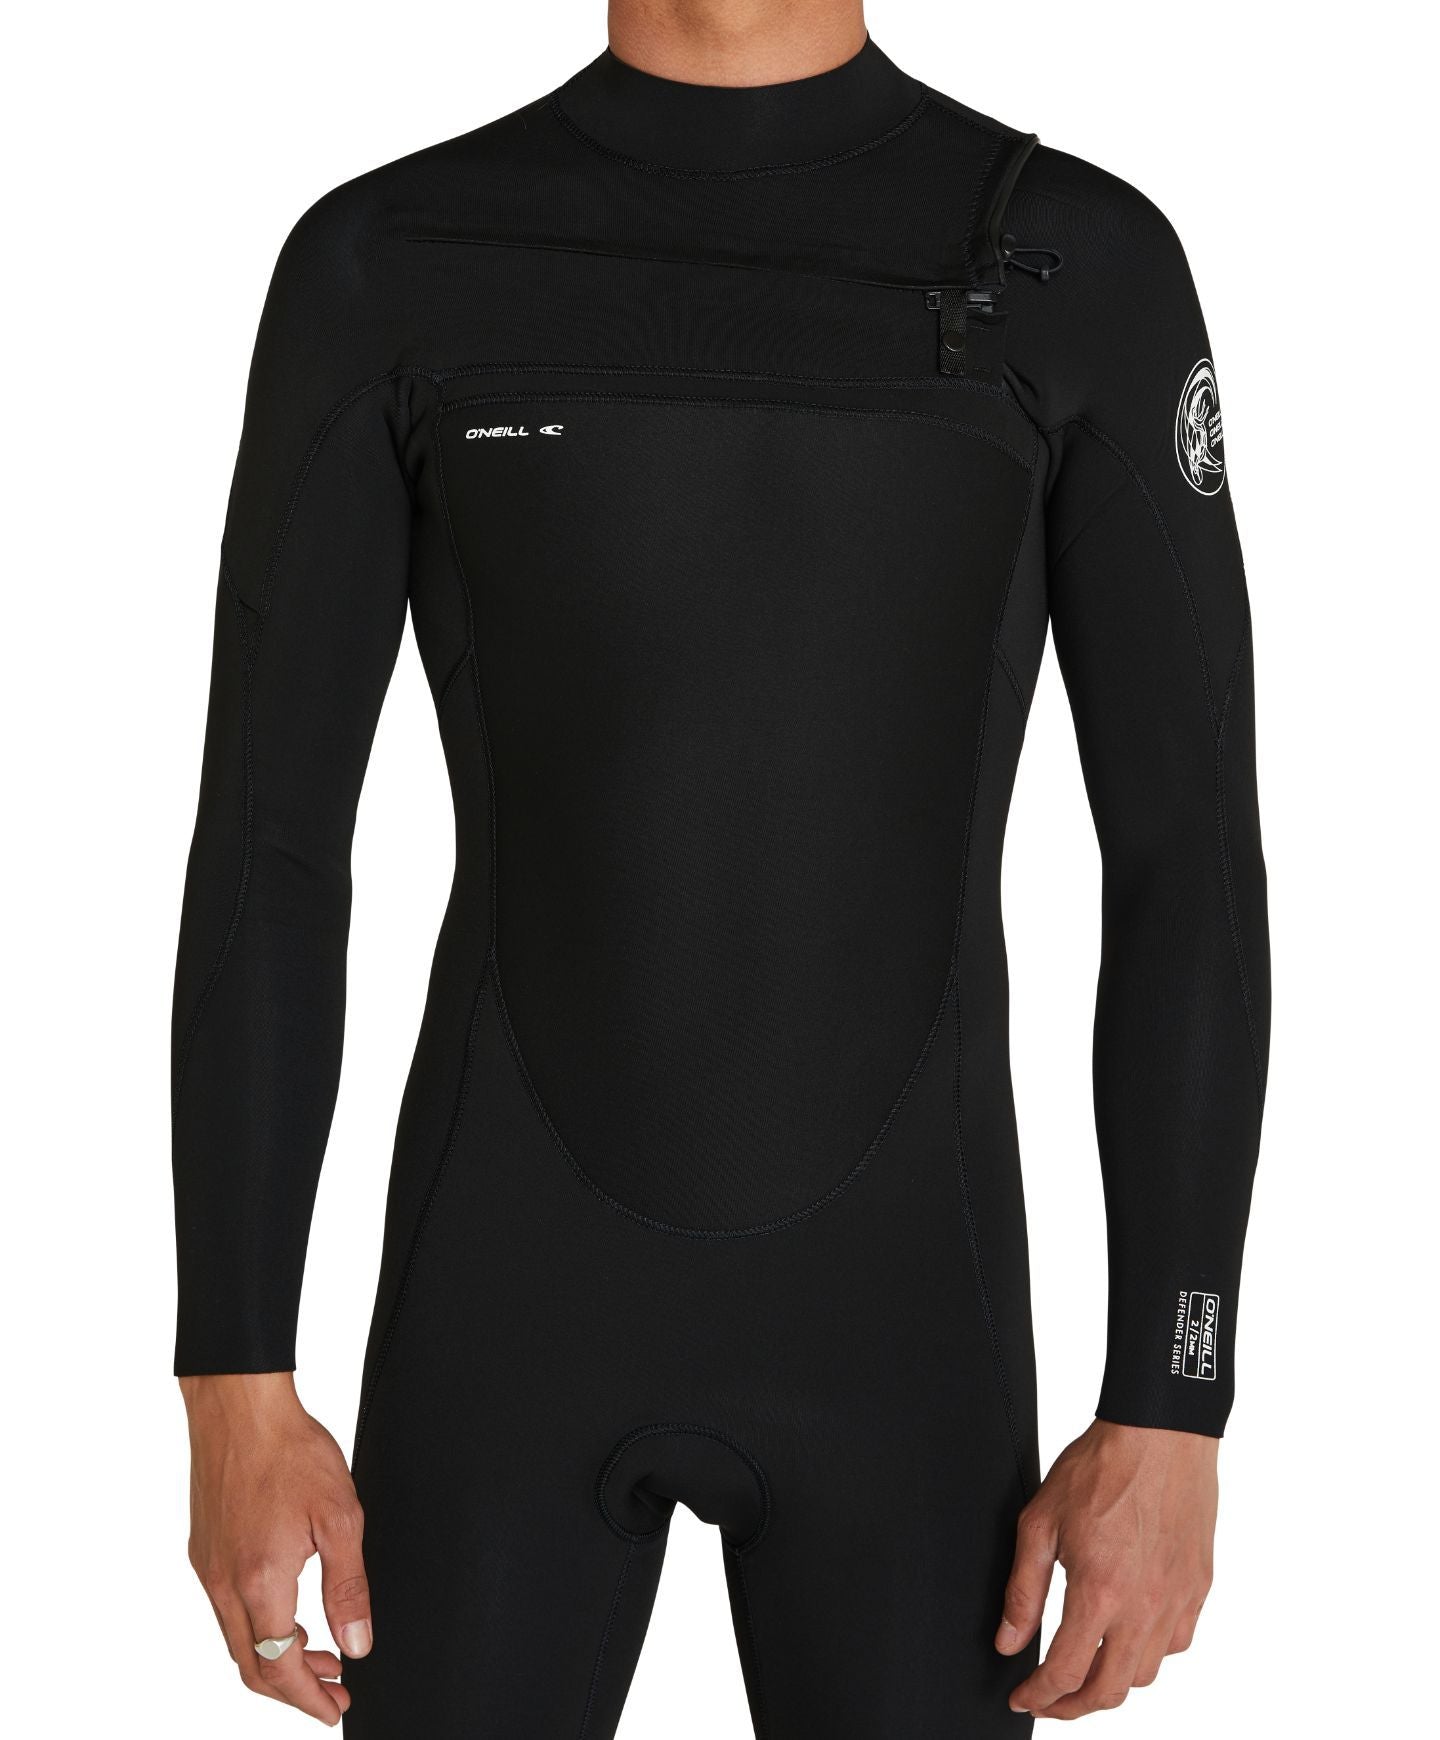 O'Neill Defender 2mm LS Chest Zip Spring Wetsuit in black on model